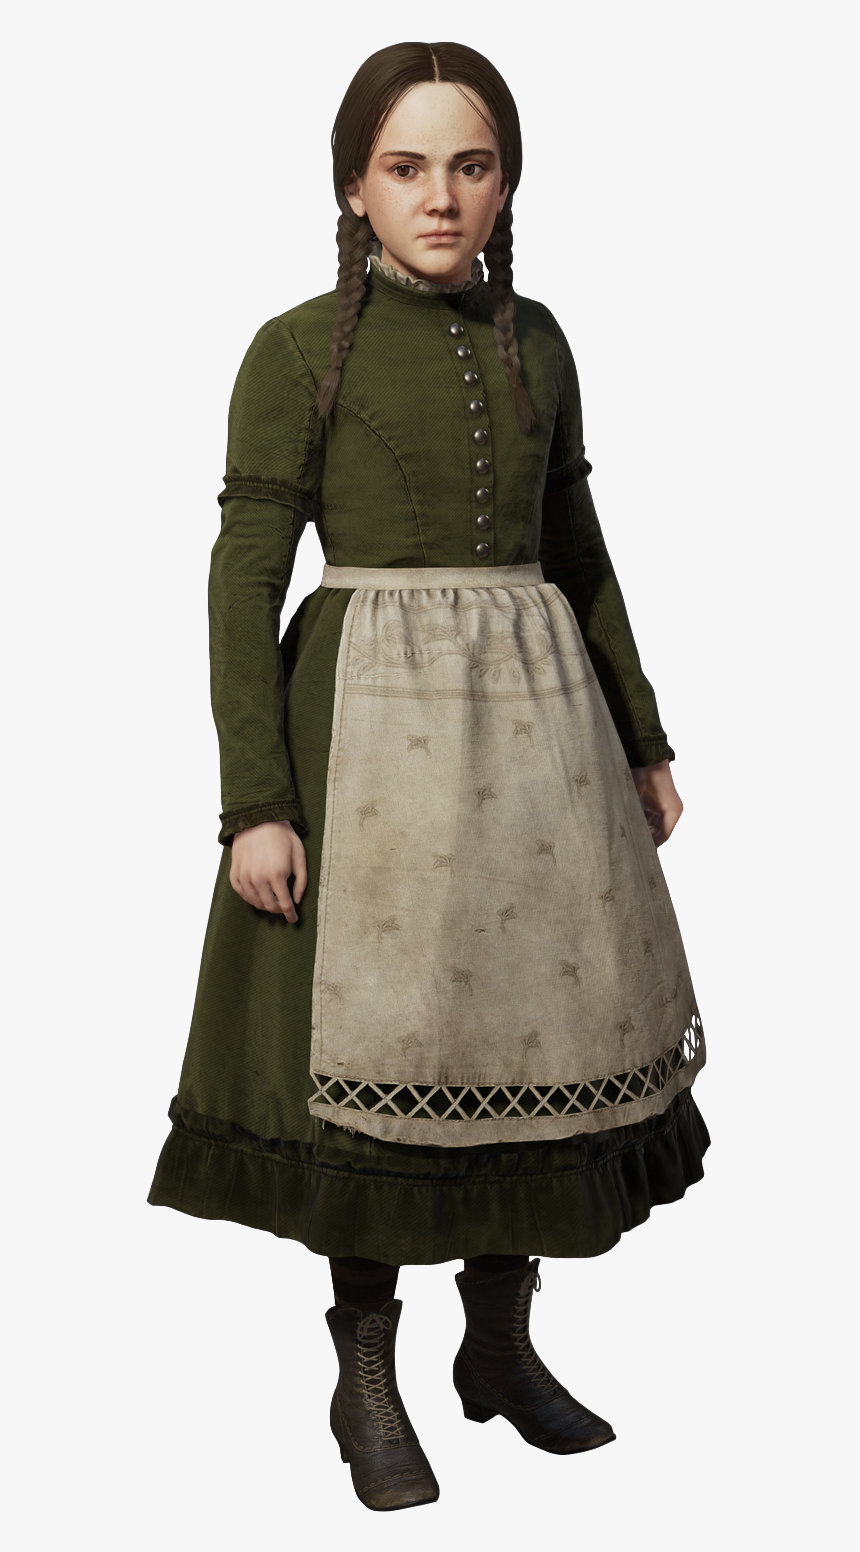   - Ac Syndicate Clara O Dea, HD Png Download, Free Download